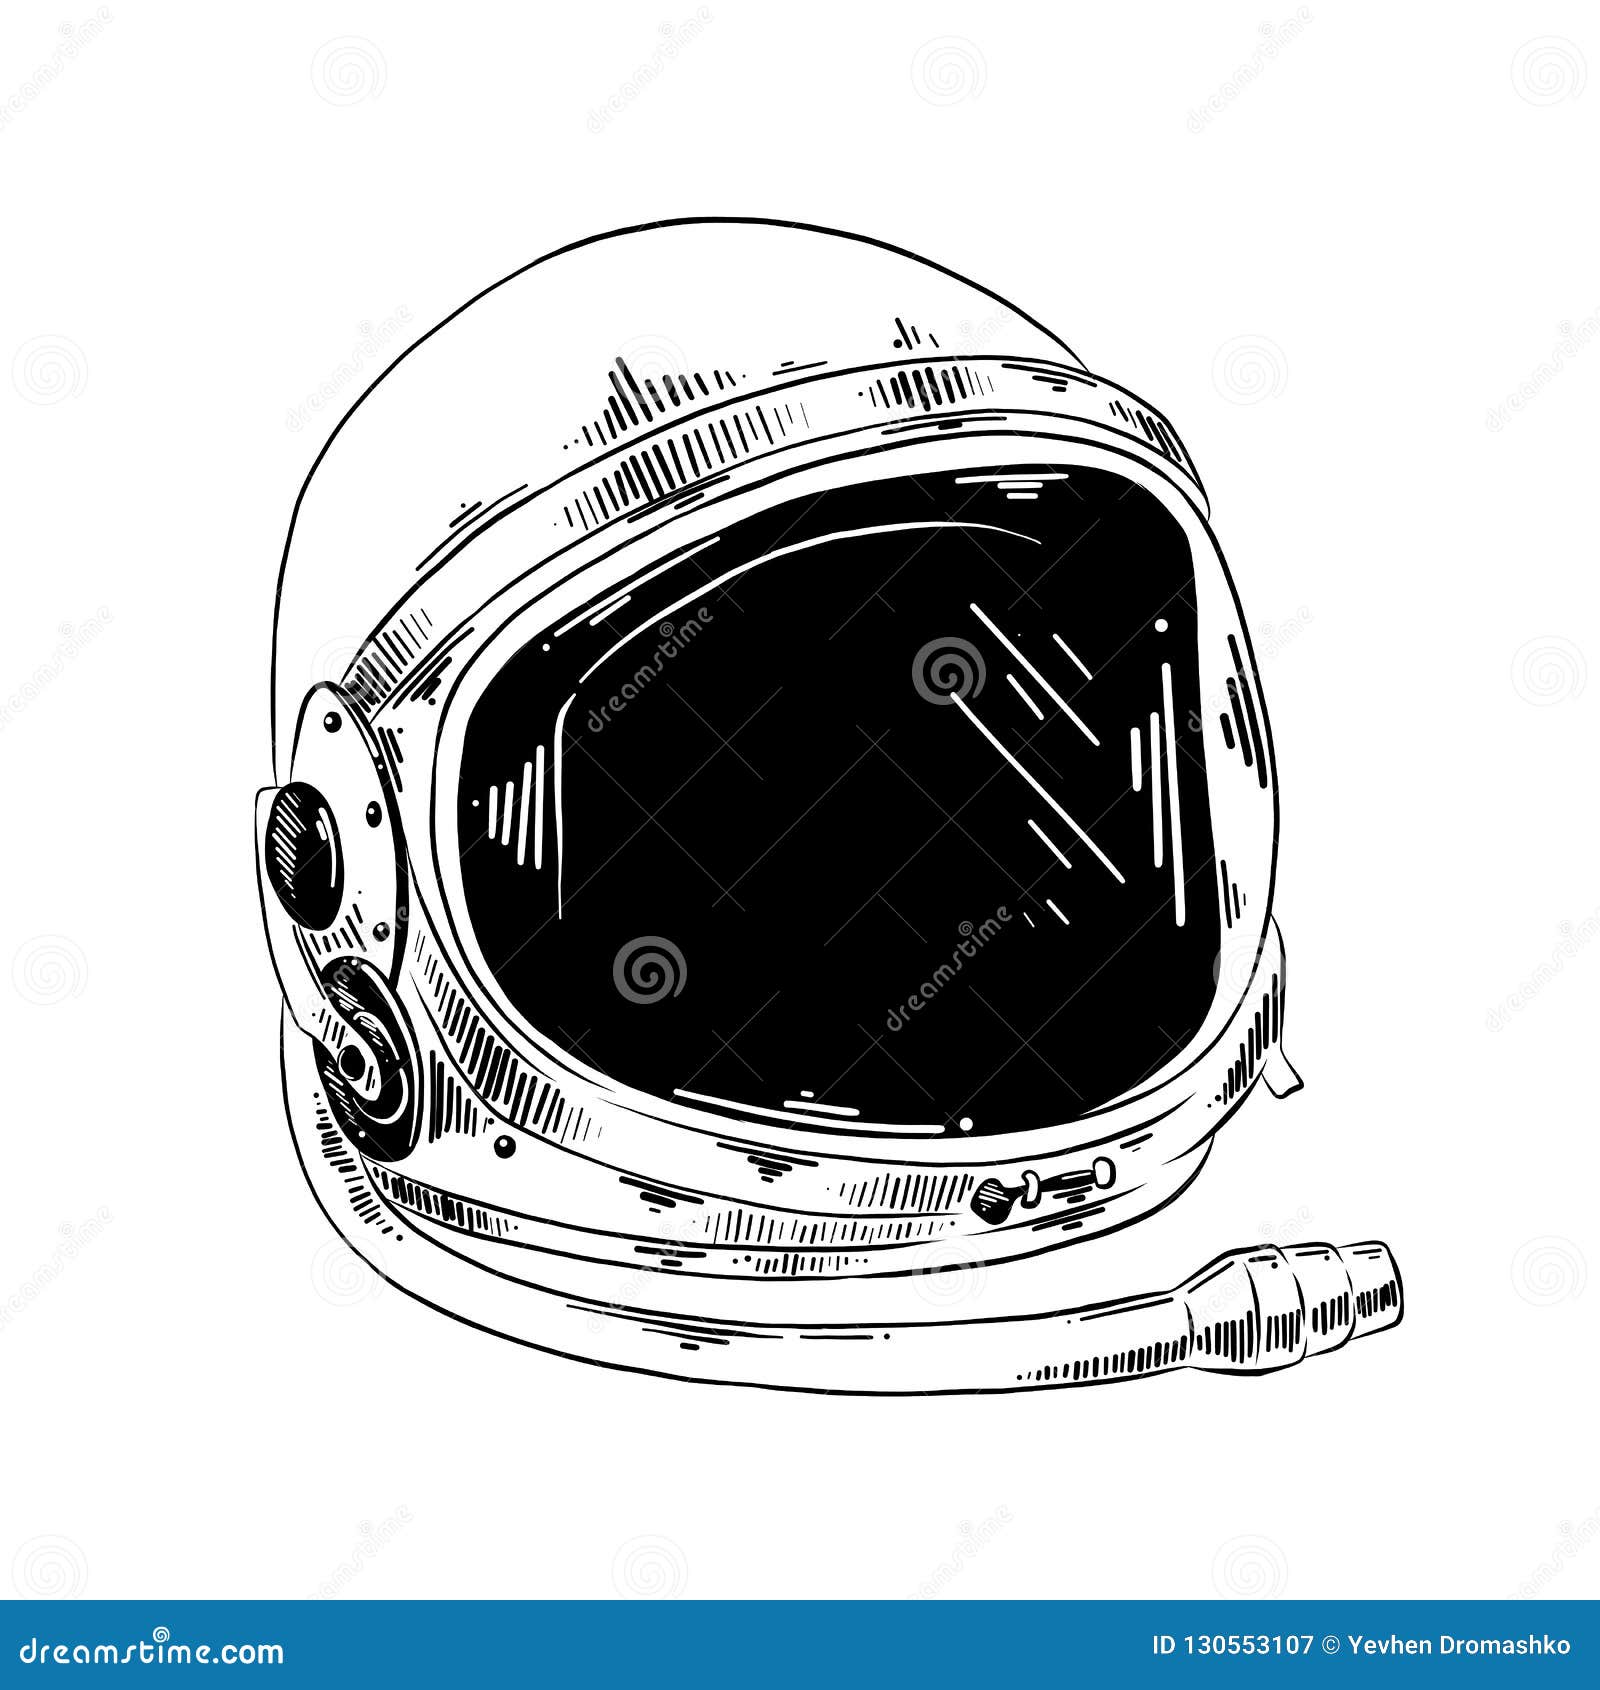 Hand Drawn Sketch of Astronaut Helmet in Black Isolated on White